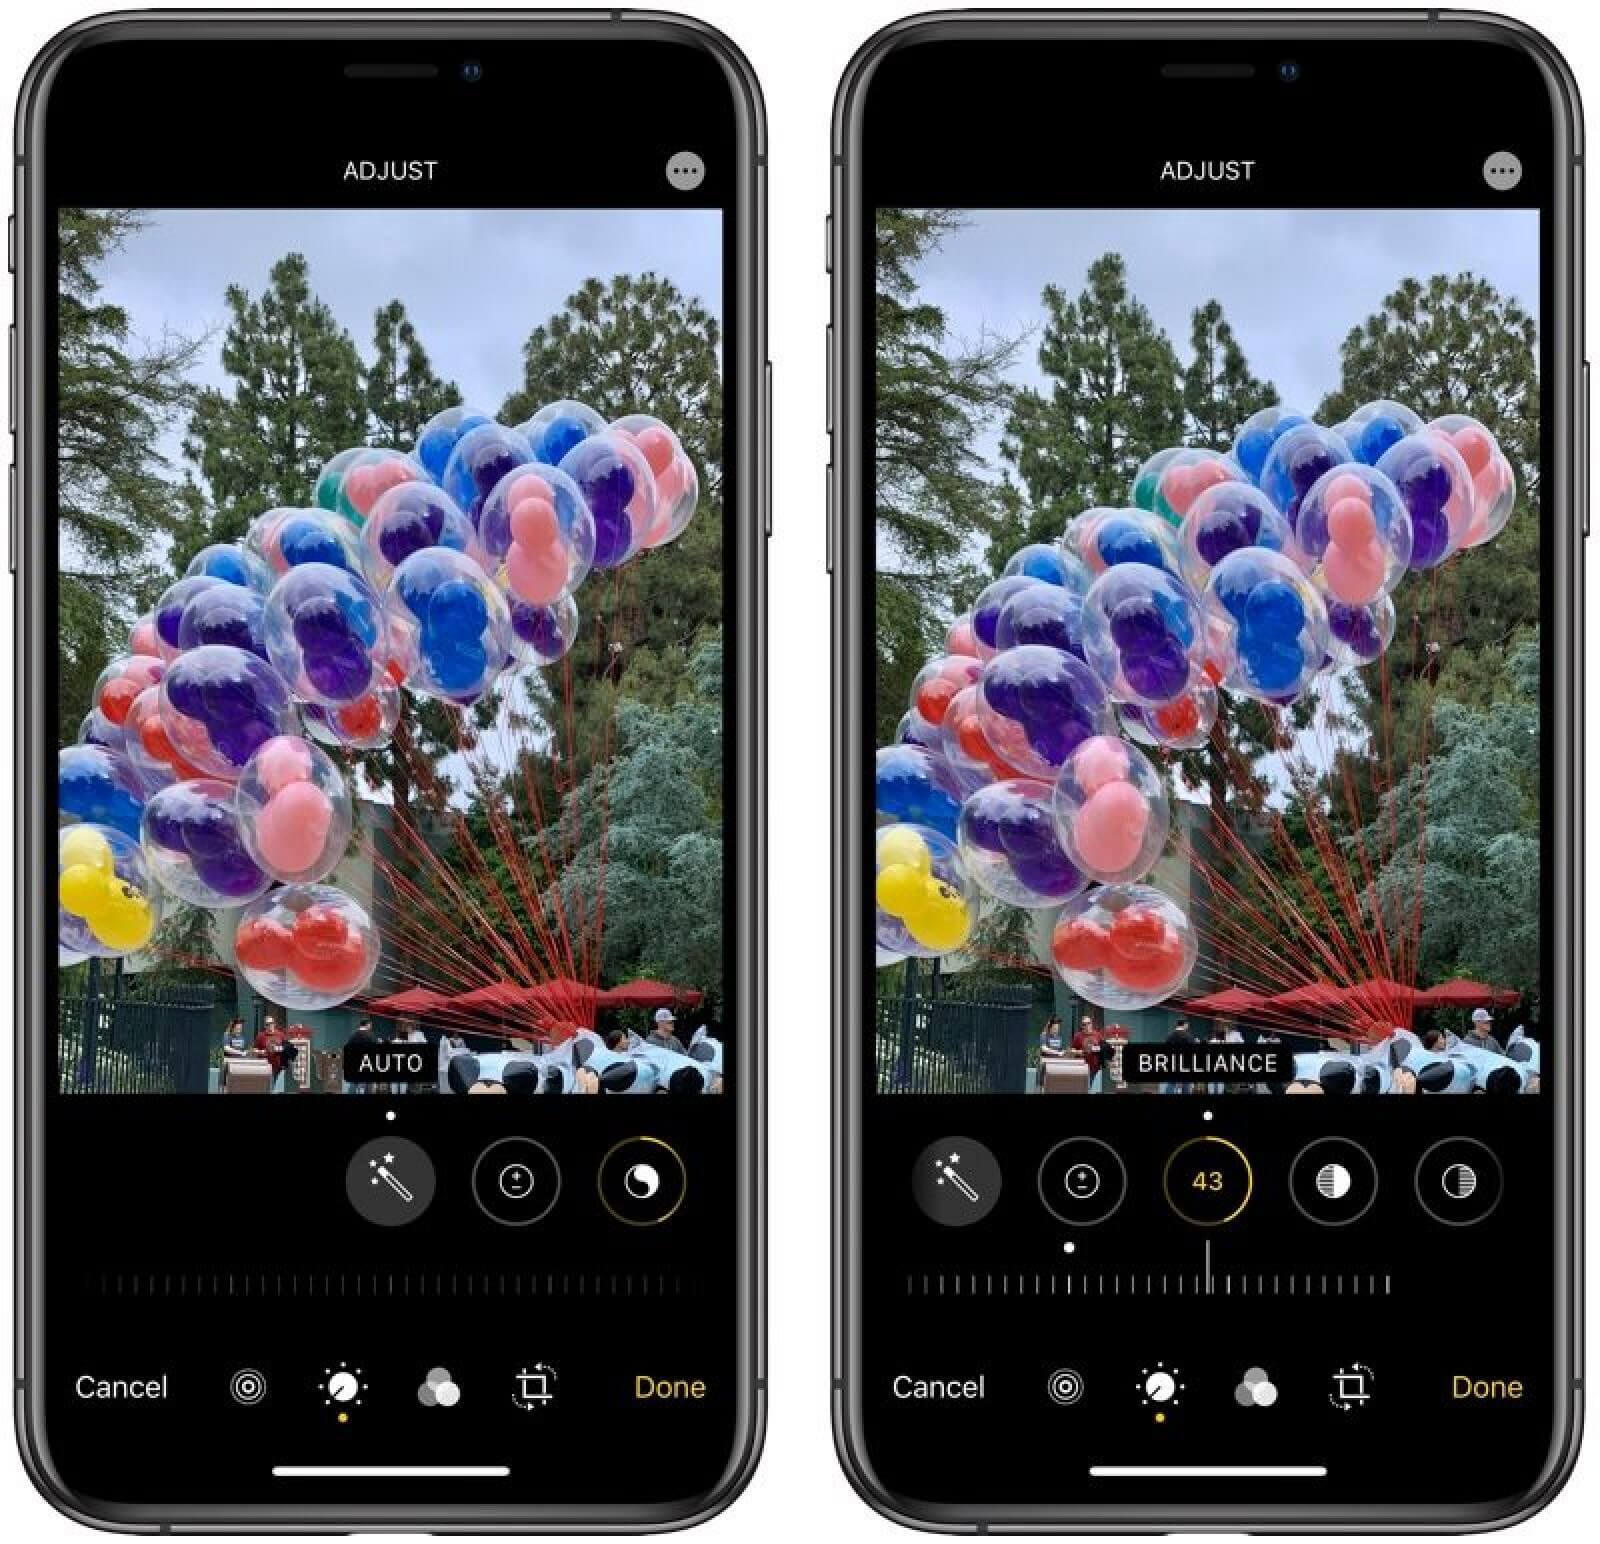 With new iOS 13 editing features, users can change any aspect of their photos